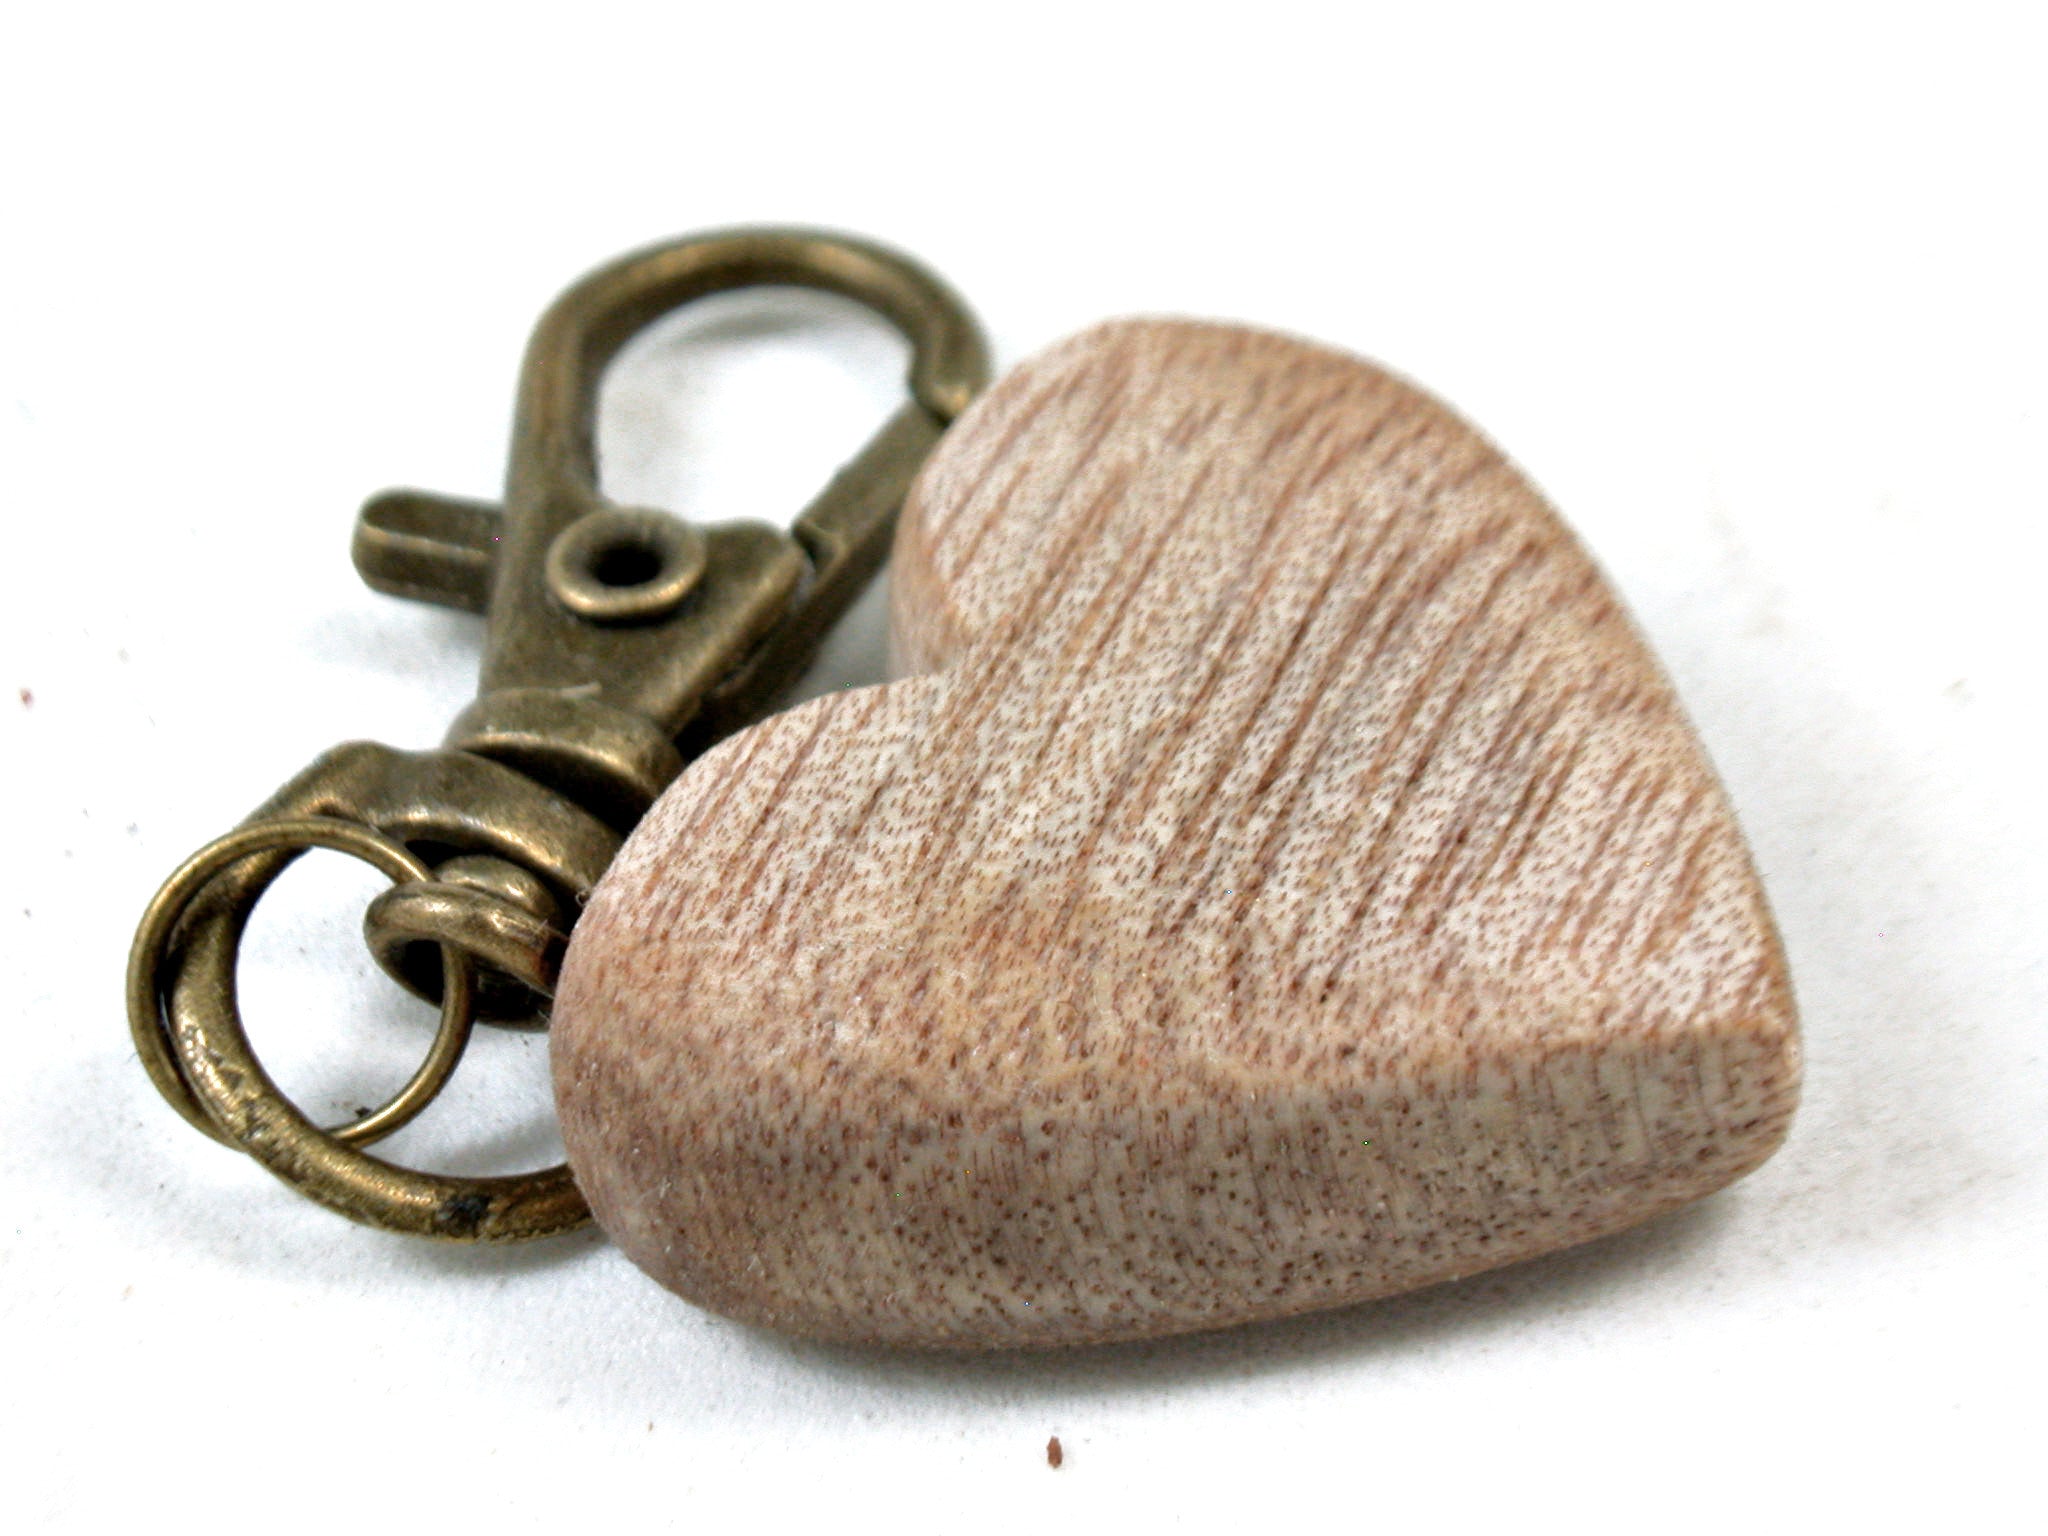 LV-3684  Primavera Wooden Heart Shaped Charm, Keychain, Unique Hand Made